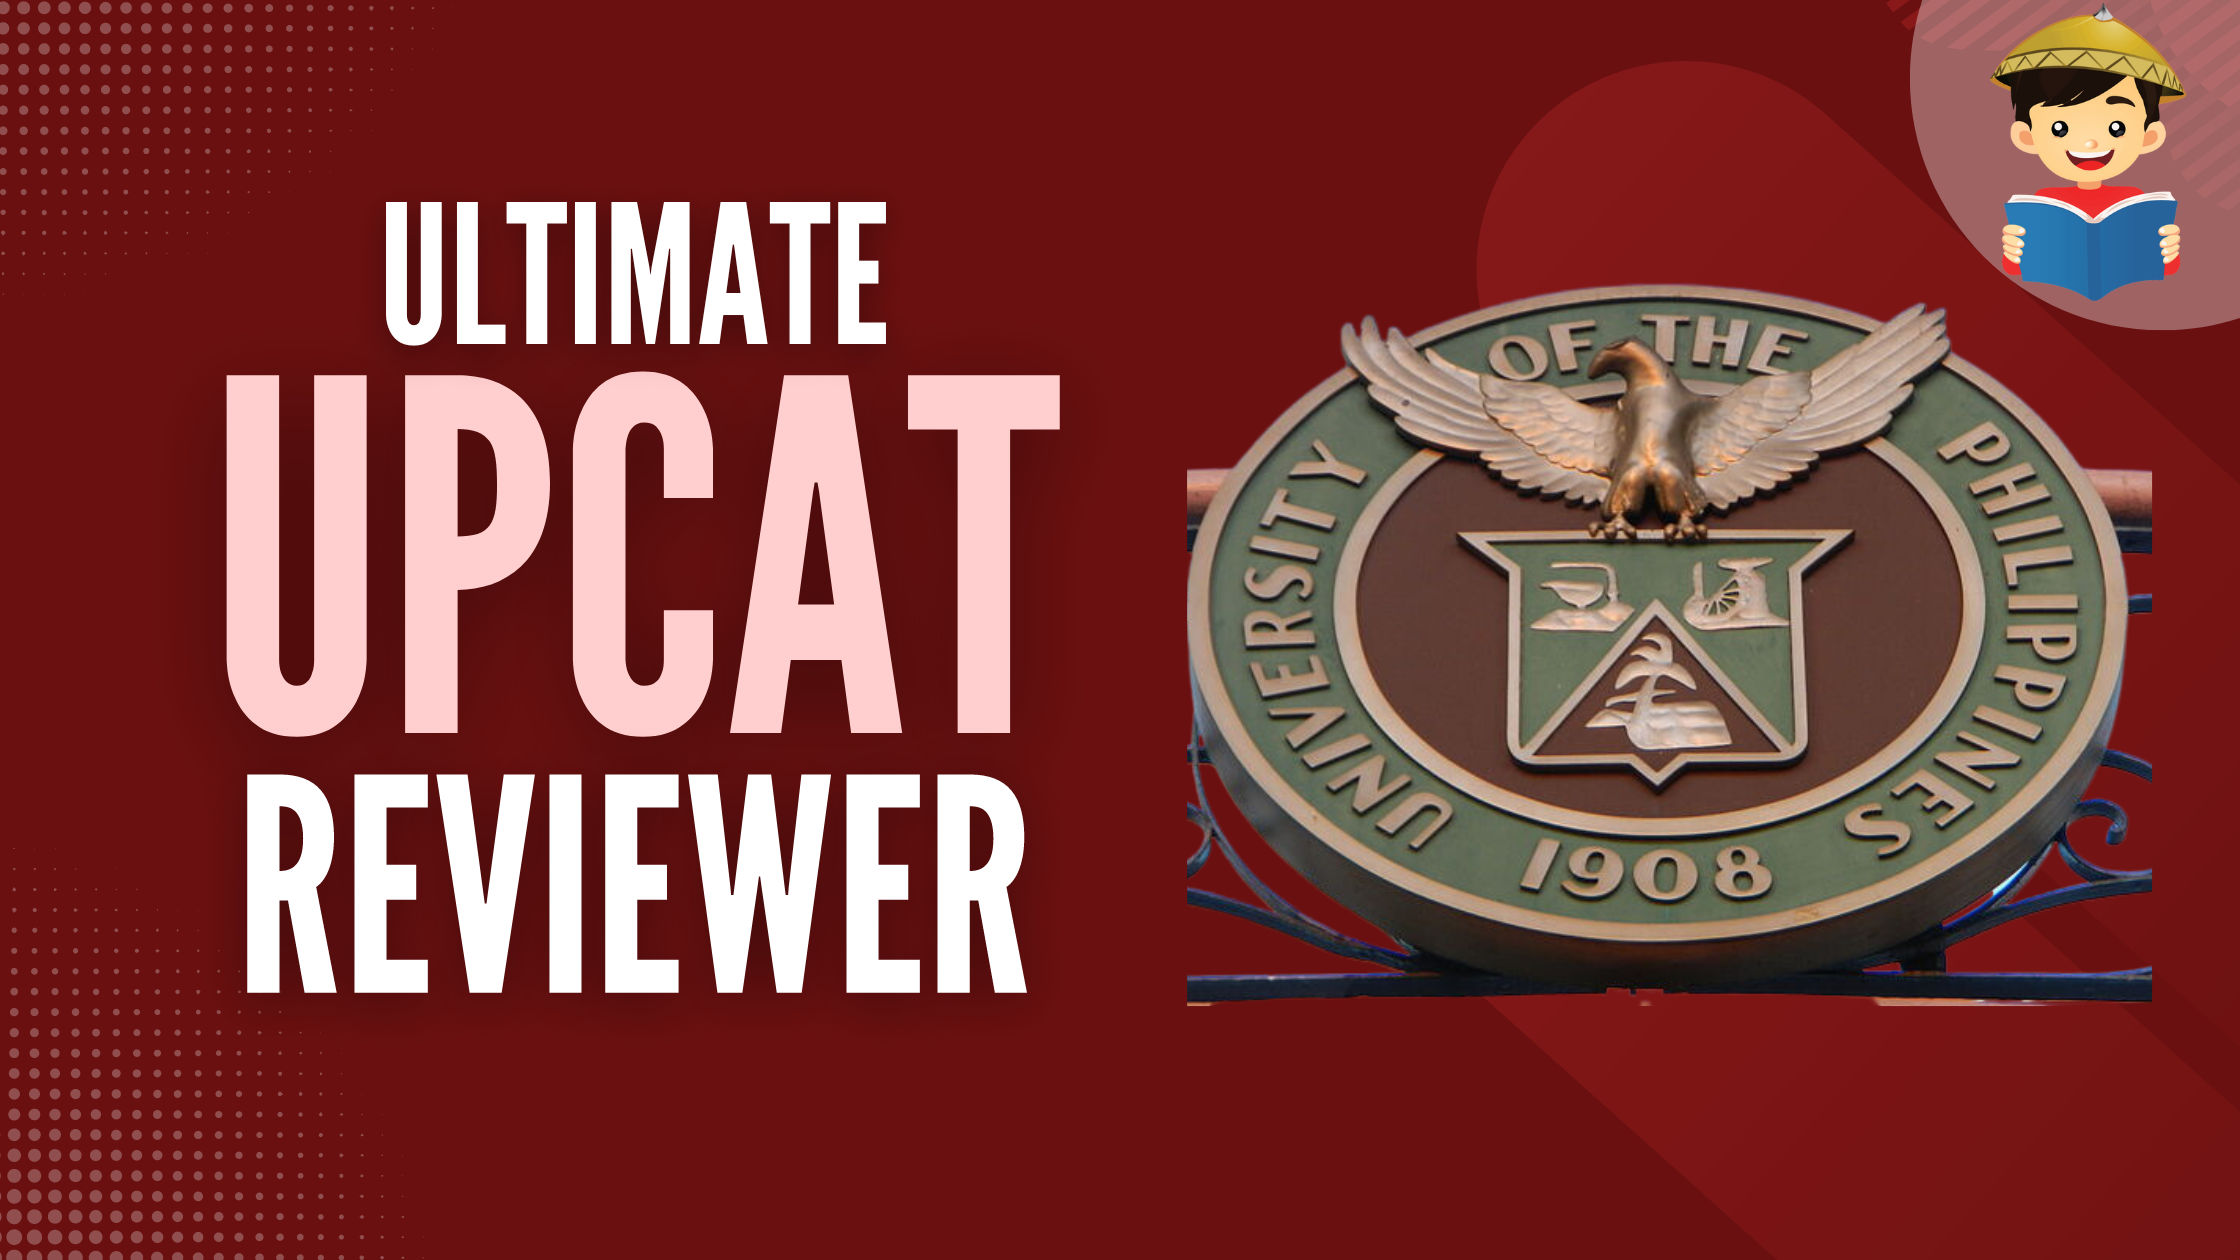 ultimate upcat reviewer featured image